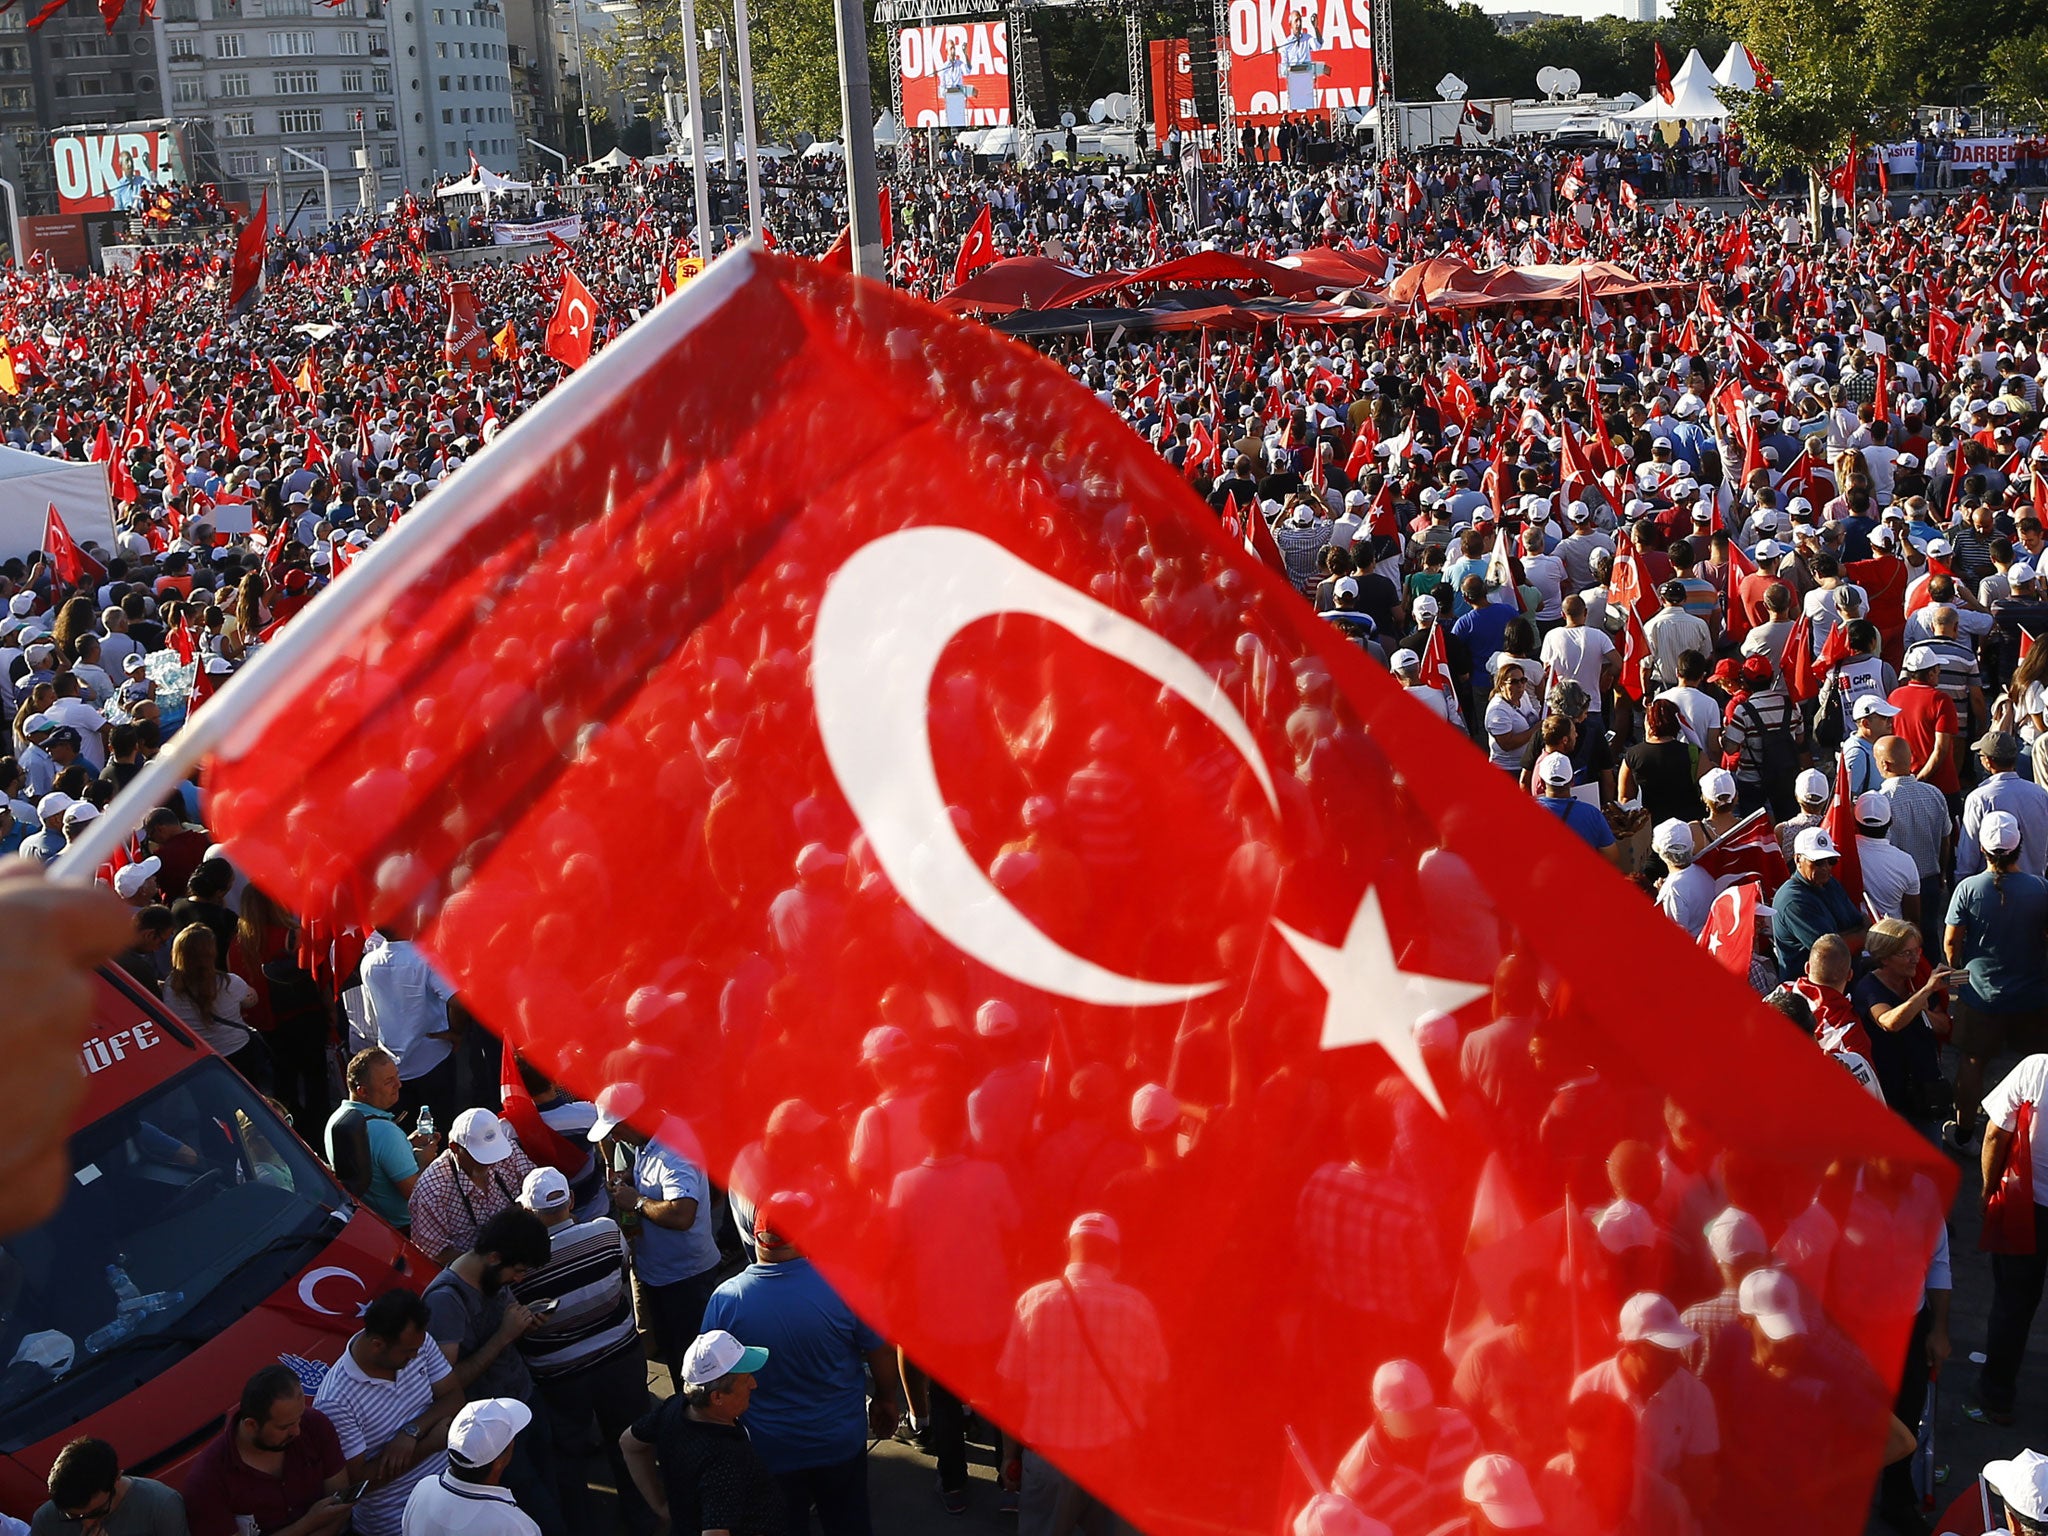 Instability in Turkey has put many visitors off